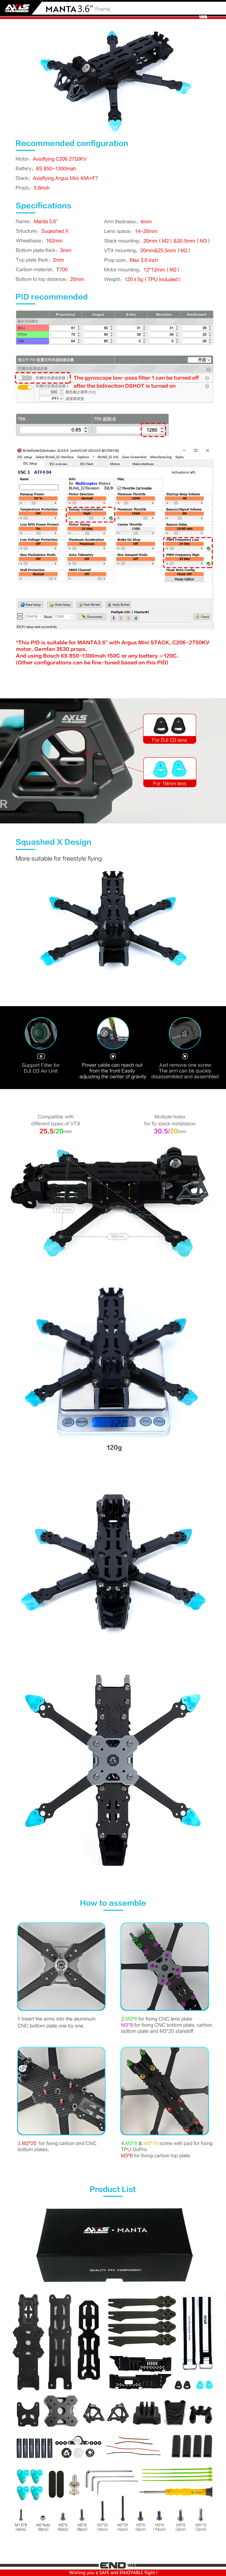 Axisflying Manta 3.6'' / 3.6inch FPV Frame / Squashed X / With side plate Axisflying Low price Manta 3.6inch carbon fiber fpv drone frame With side plate hexacopter drone frame,drone frame carbon fiber,mini drone frame,fpv drone frame,frame for drone,frame 3.5 drone fpv,drone frame